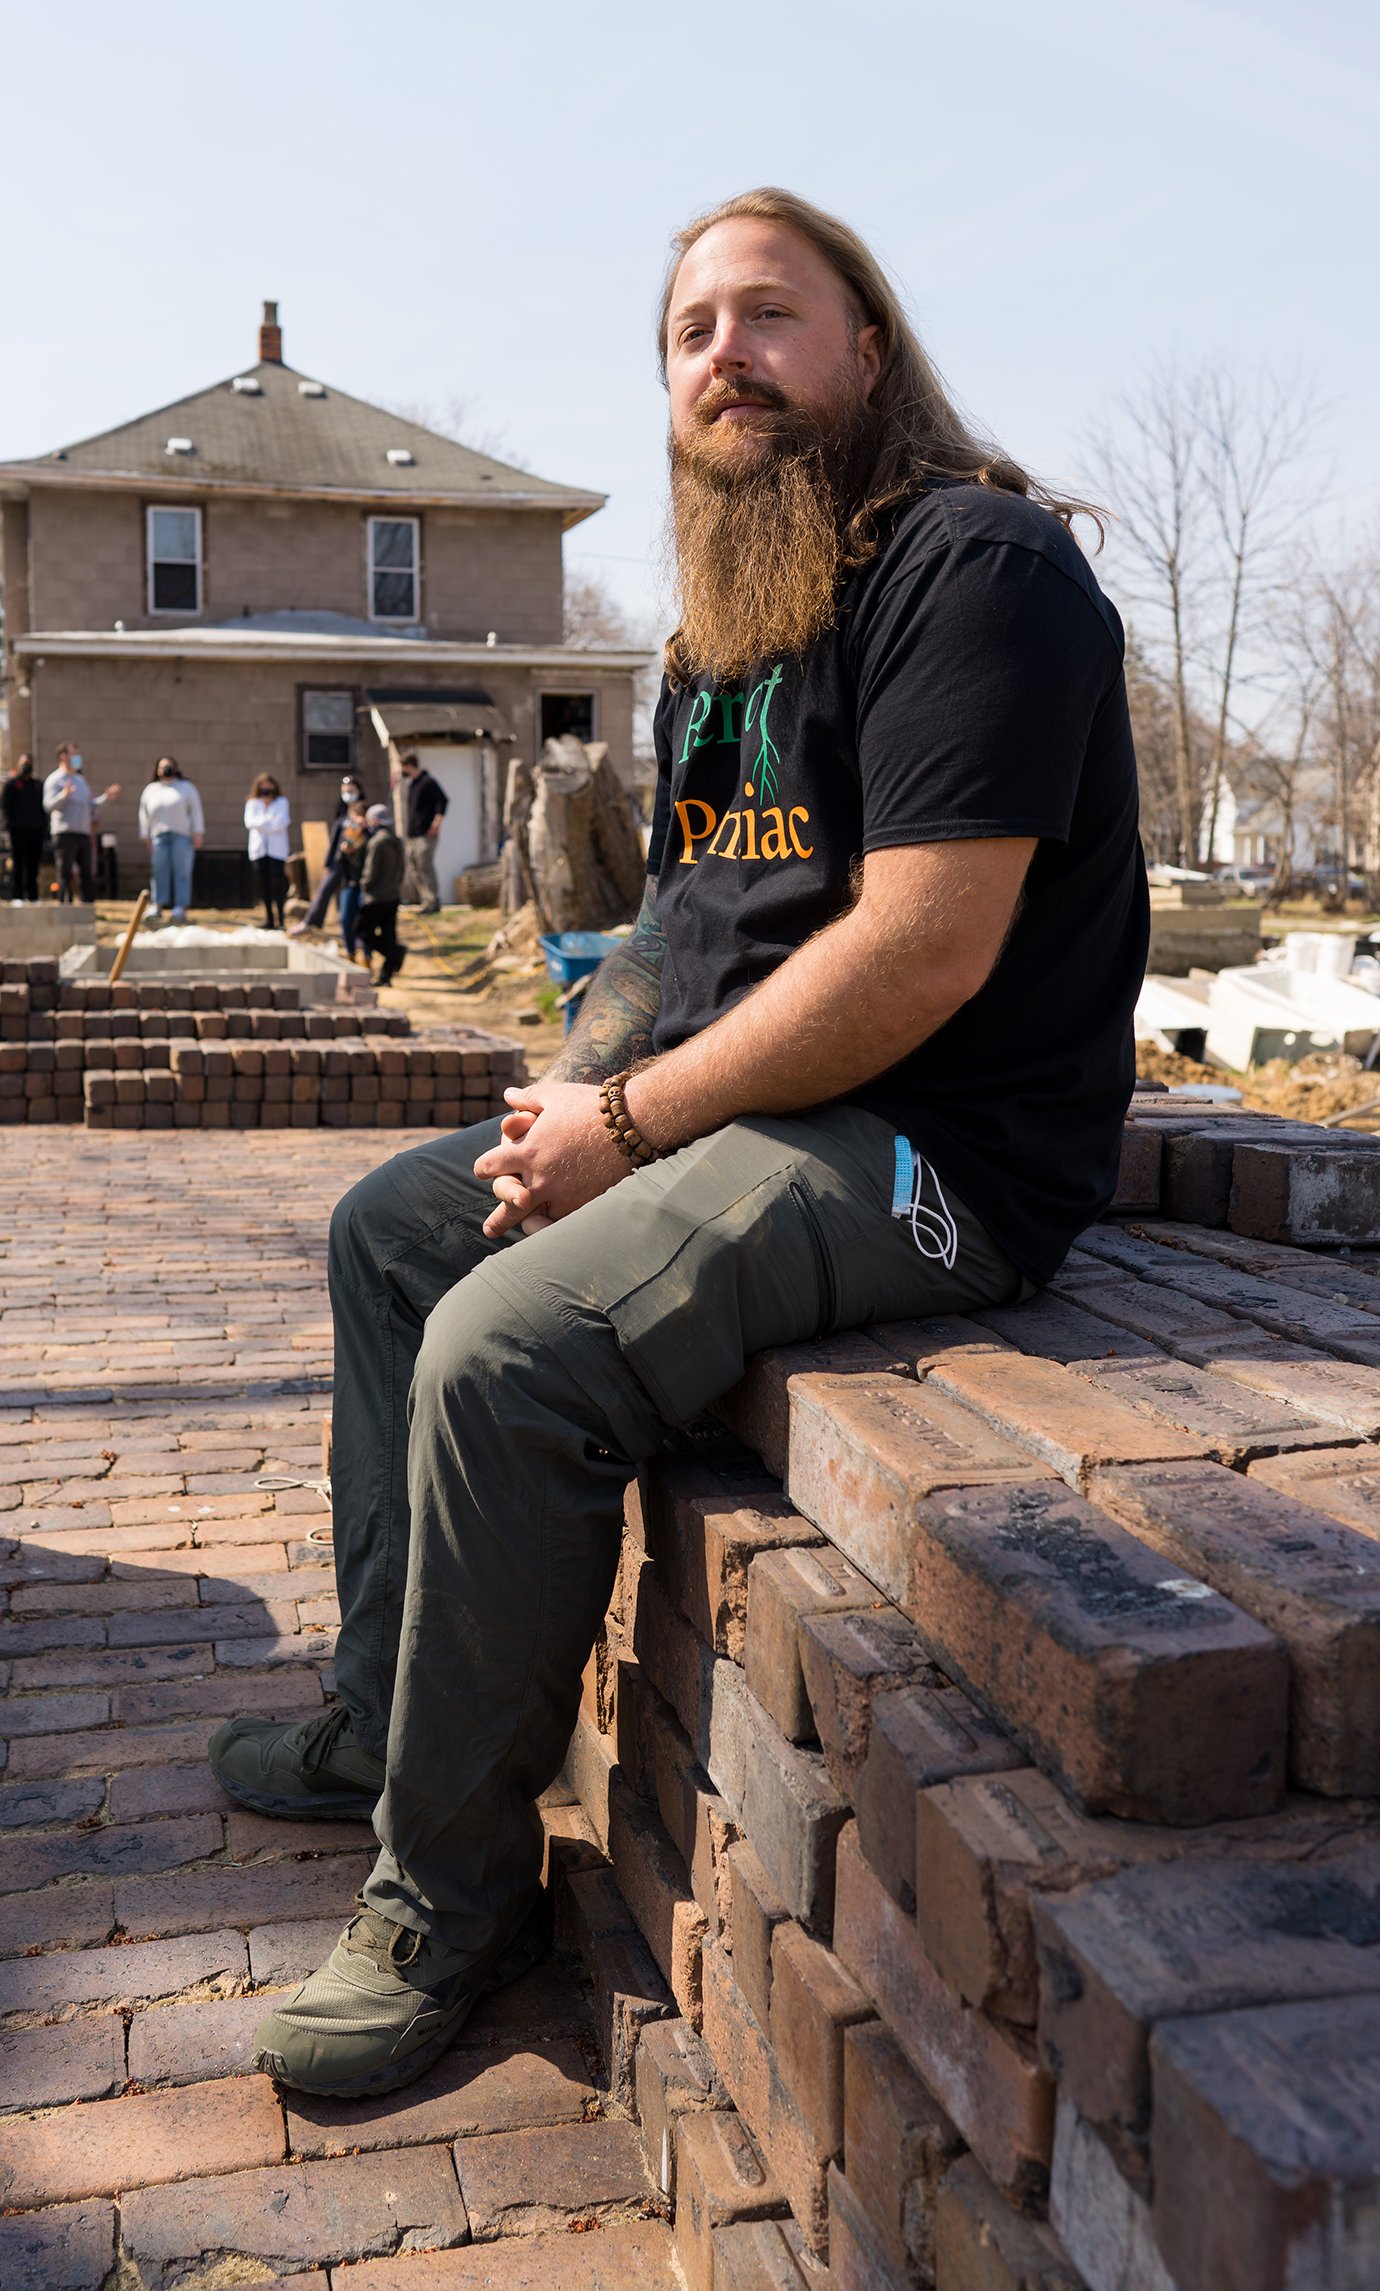 A man sitting on a ledge with a house and people in the background.